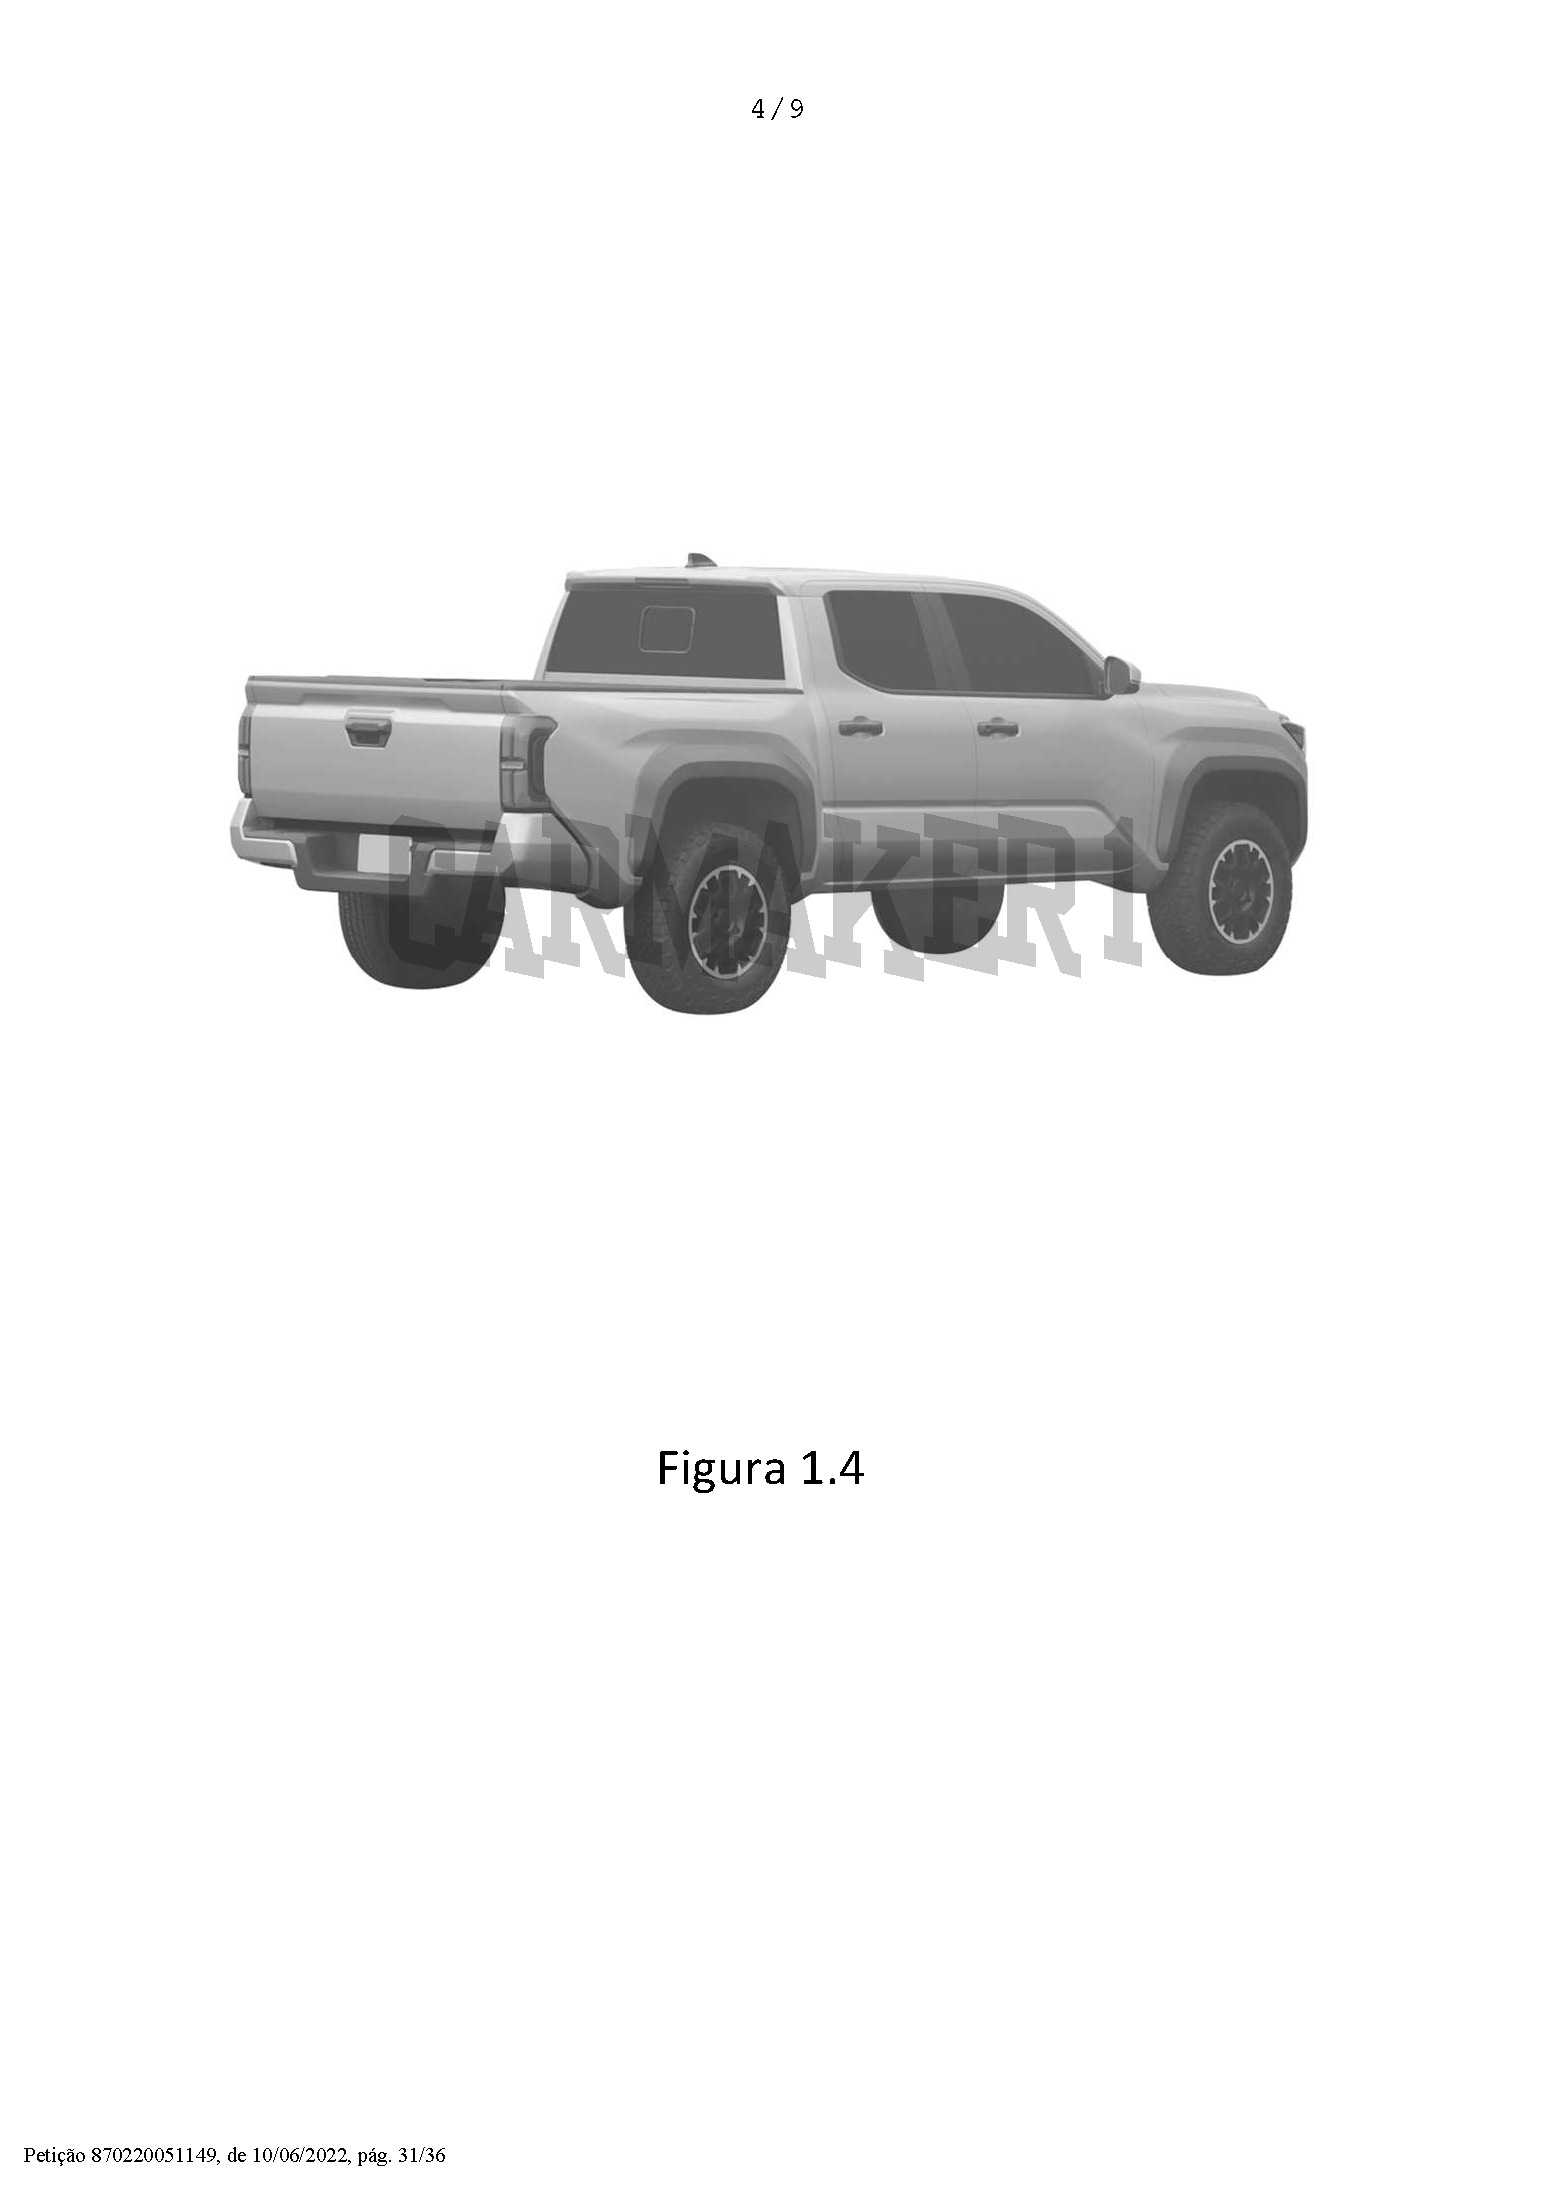 2024 Tacoma 2024 Tacoma Design Images Revealed in Patent! 📸 🕵🏻‍♂️ 302022003011_Page_07